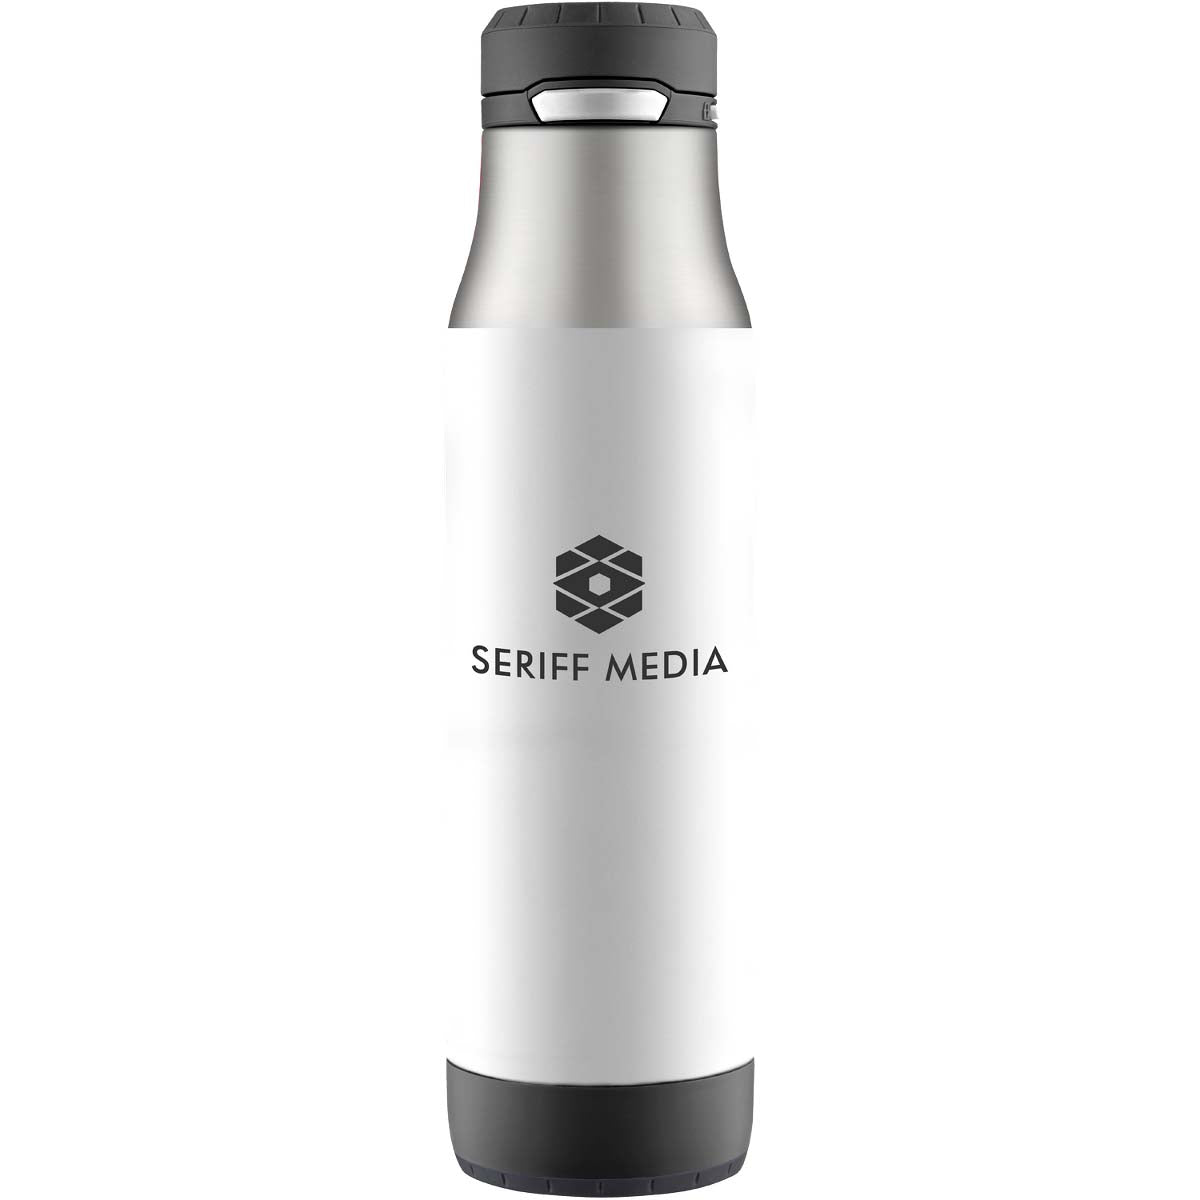 ZULU Ace Vacuum Insulated Stainless Steel Water Bottle with Removable Base 24  Oz